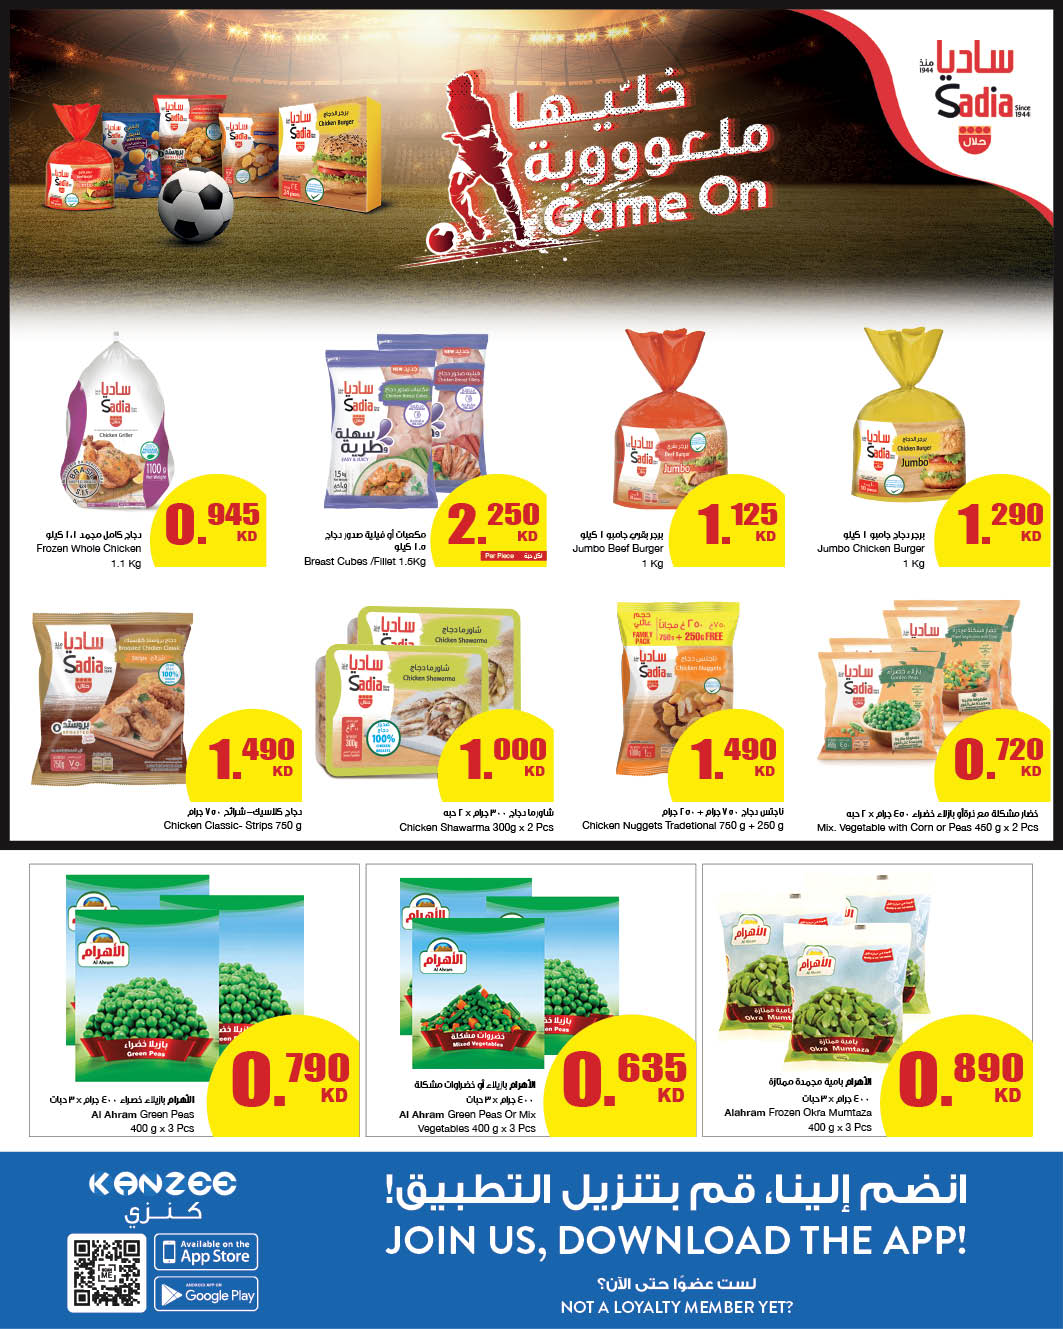 The Sultan Center Weekly Offers, Kuwait Sultan promotion Sale 6